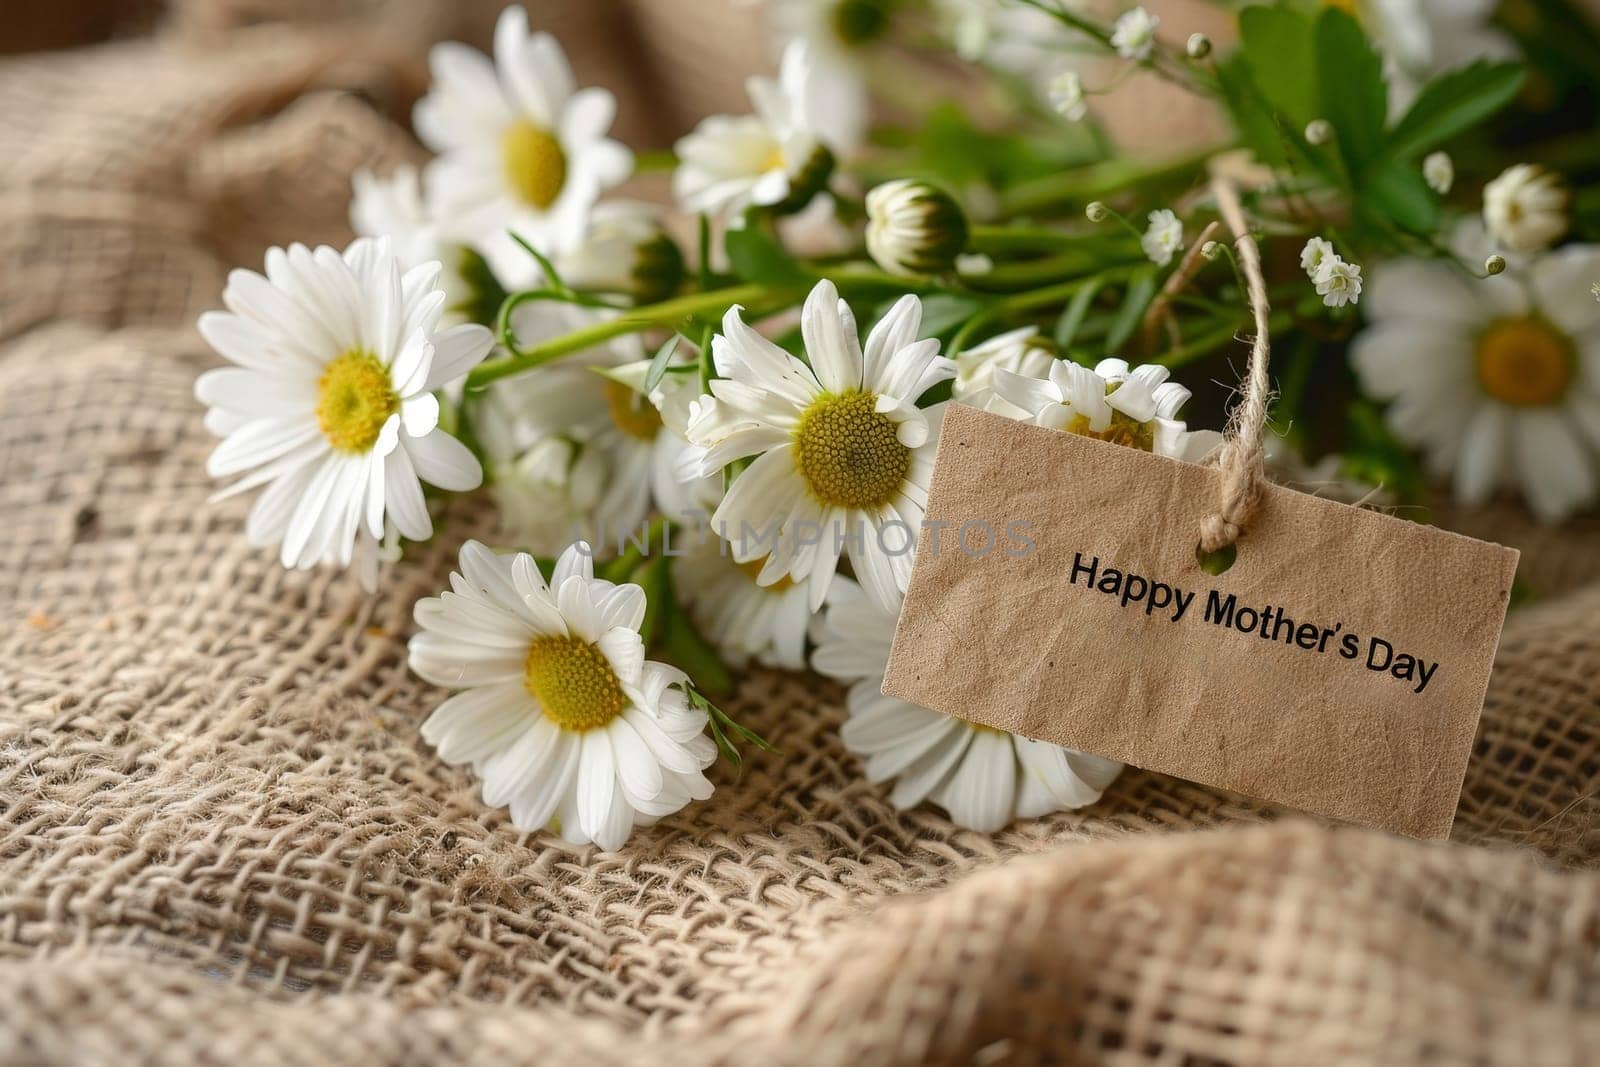 A bouquet of white flowers with a tag that says Happy Mother's Day by matamnad